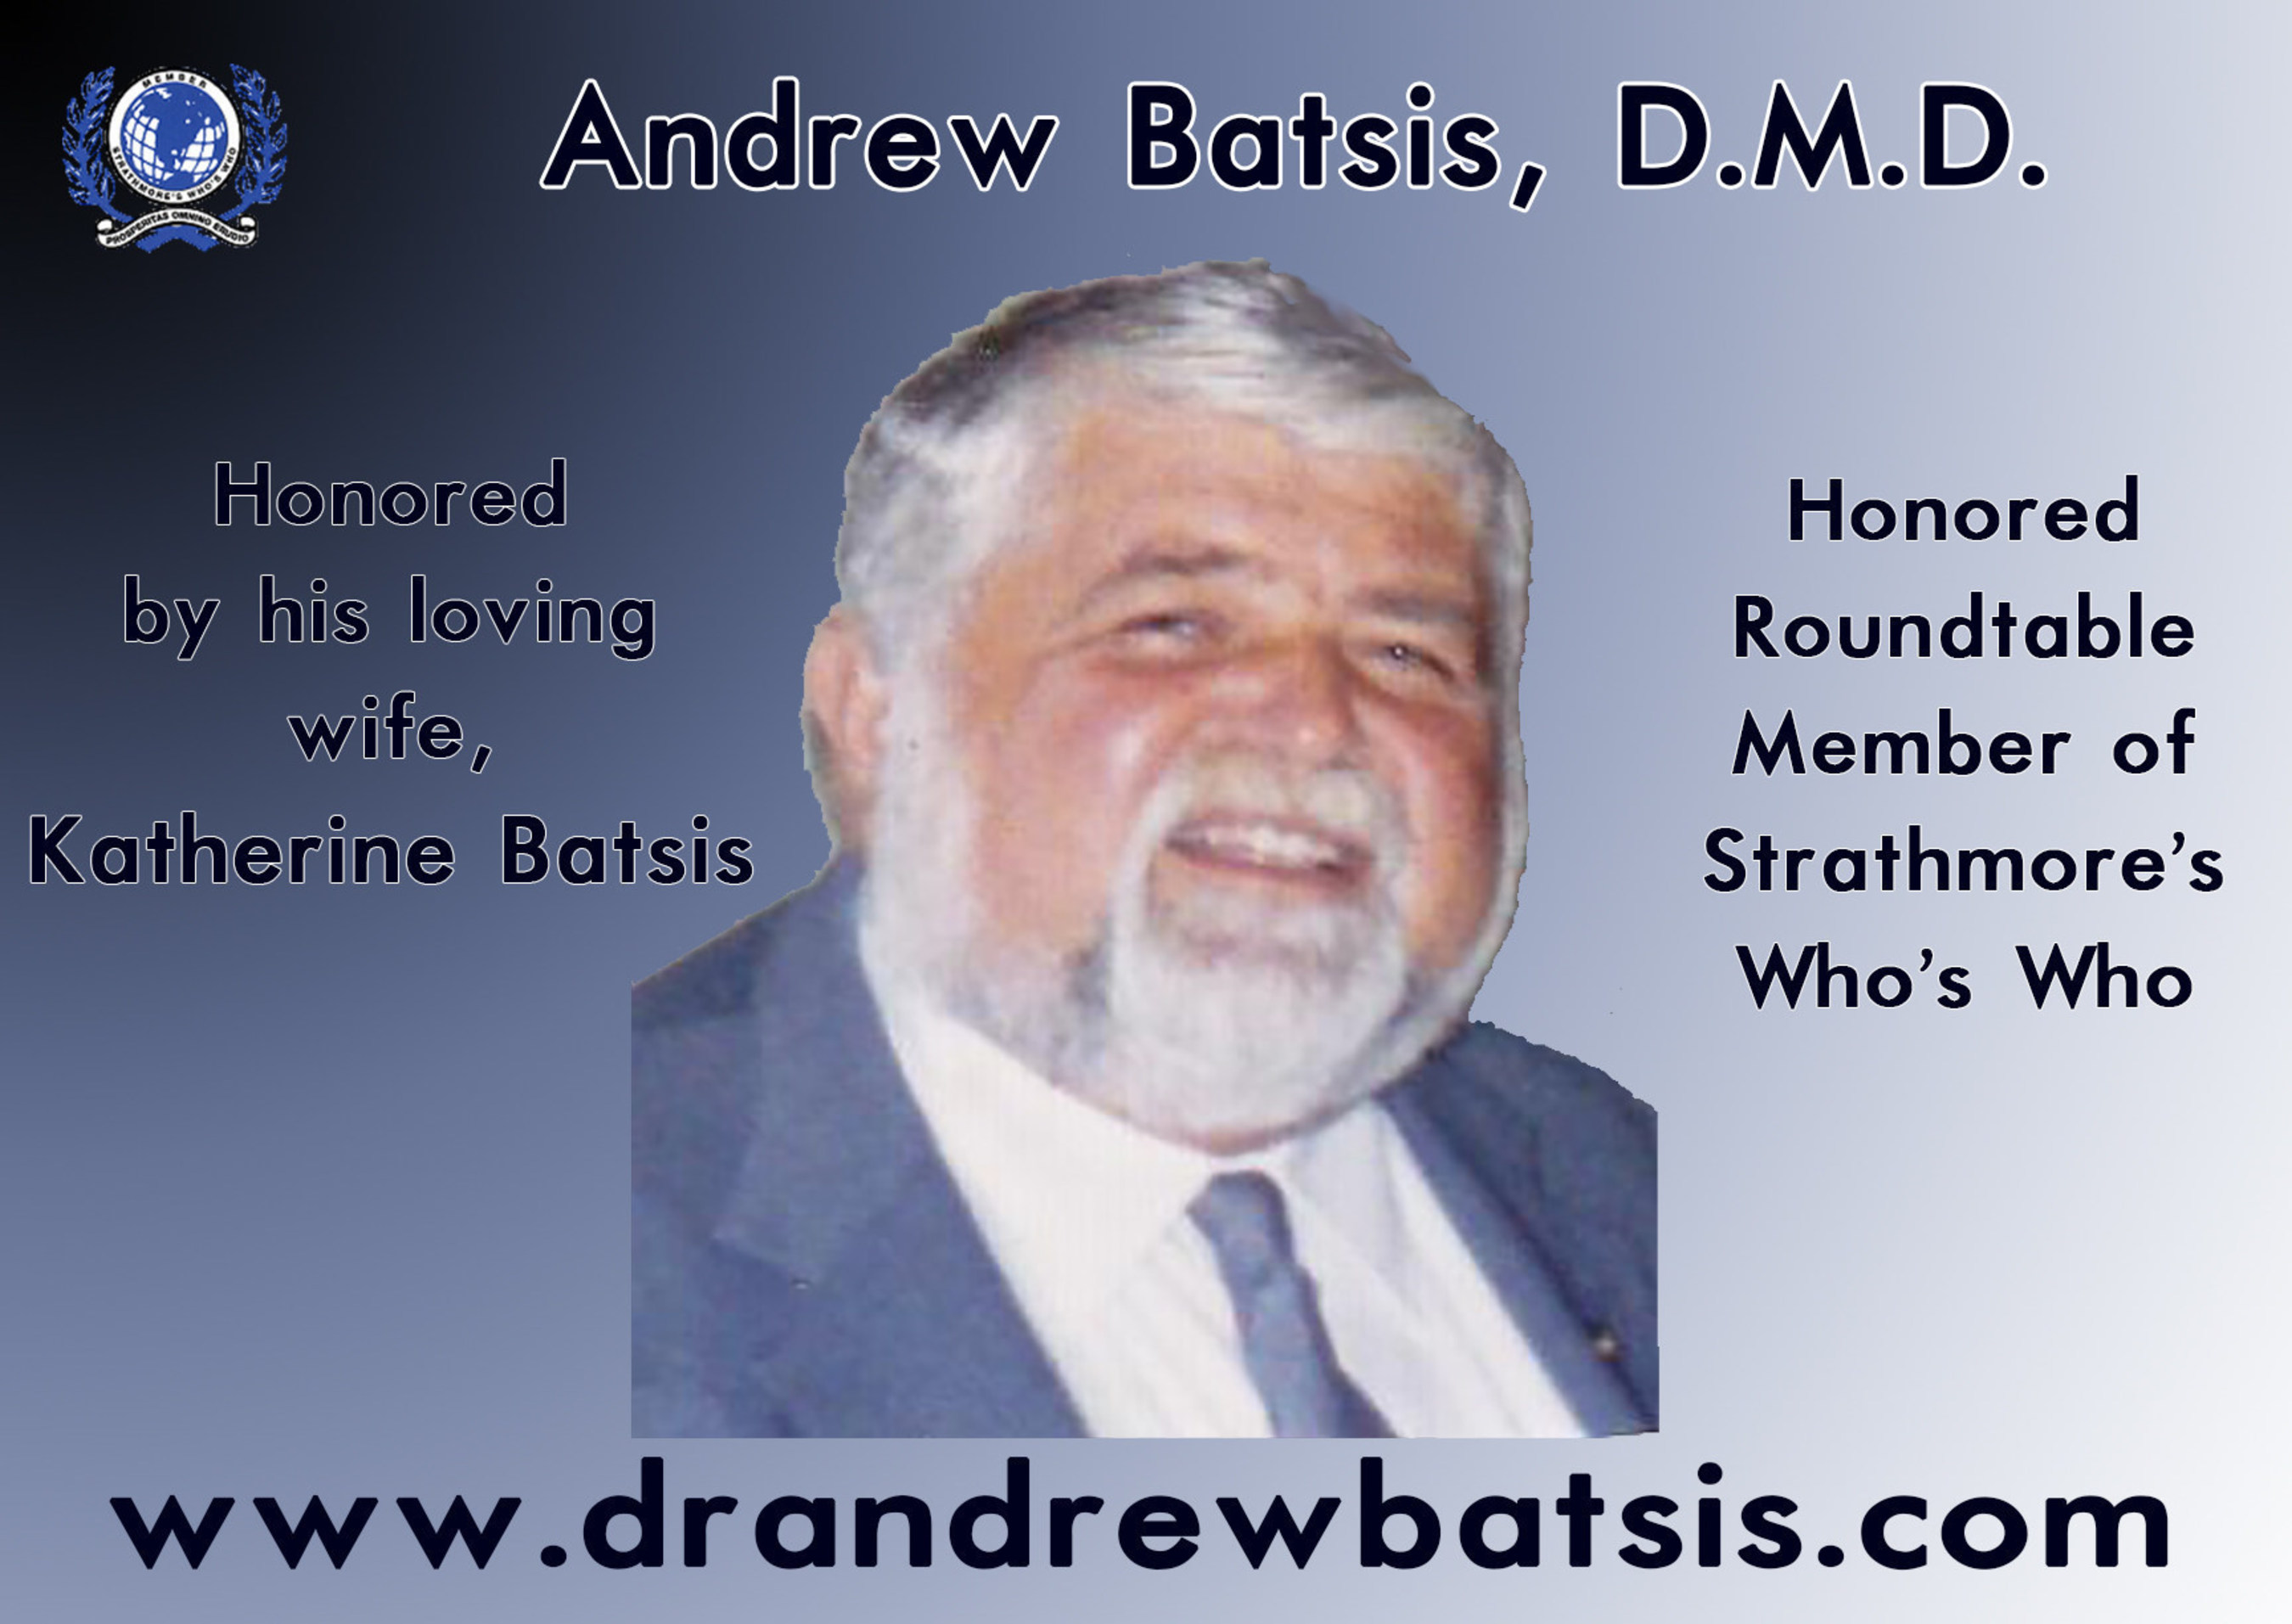 Strathmore's Who's Who Proudly Honors the Memory & Work of Andrew Batsis, D.M.D., Roundtable Member